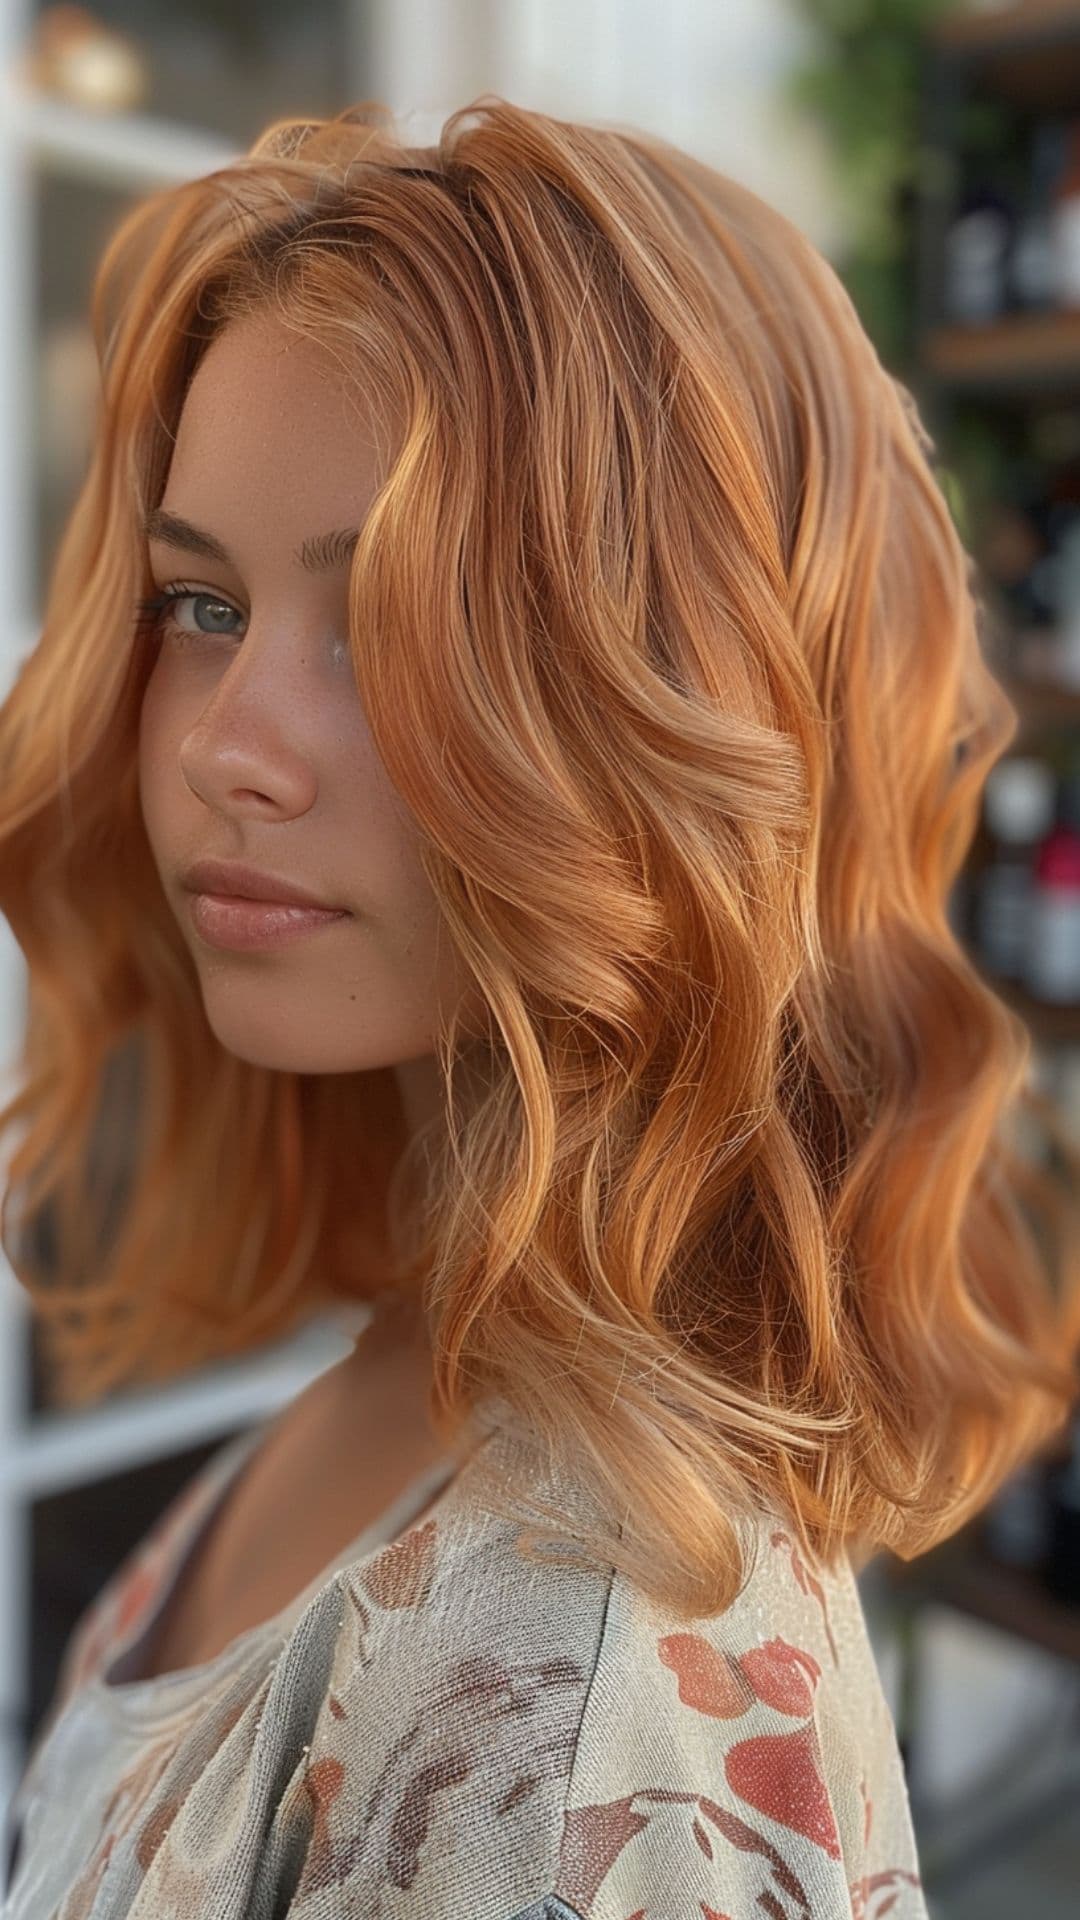 A young woman modelling a coral hair.